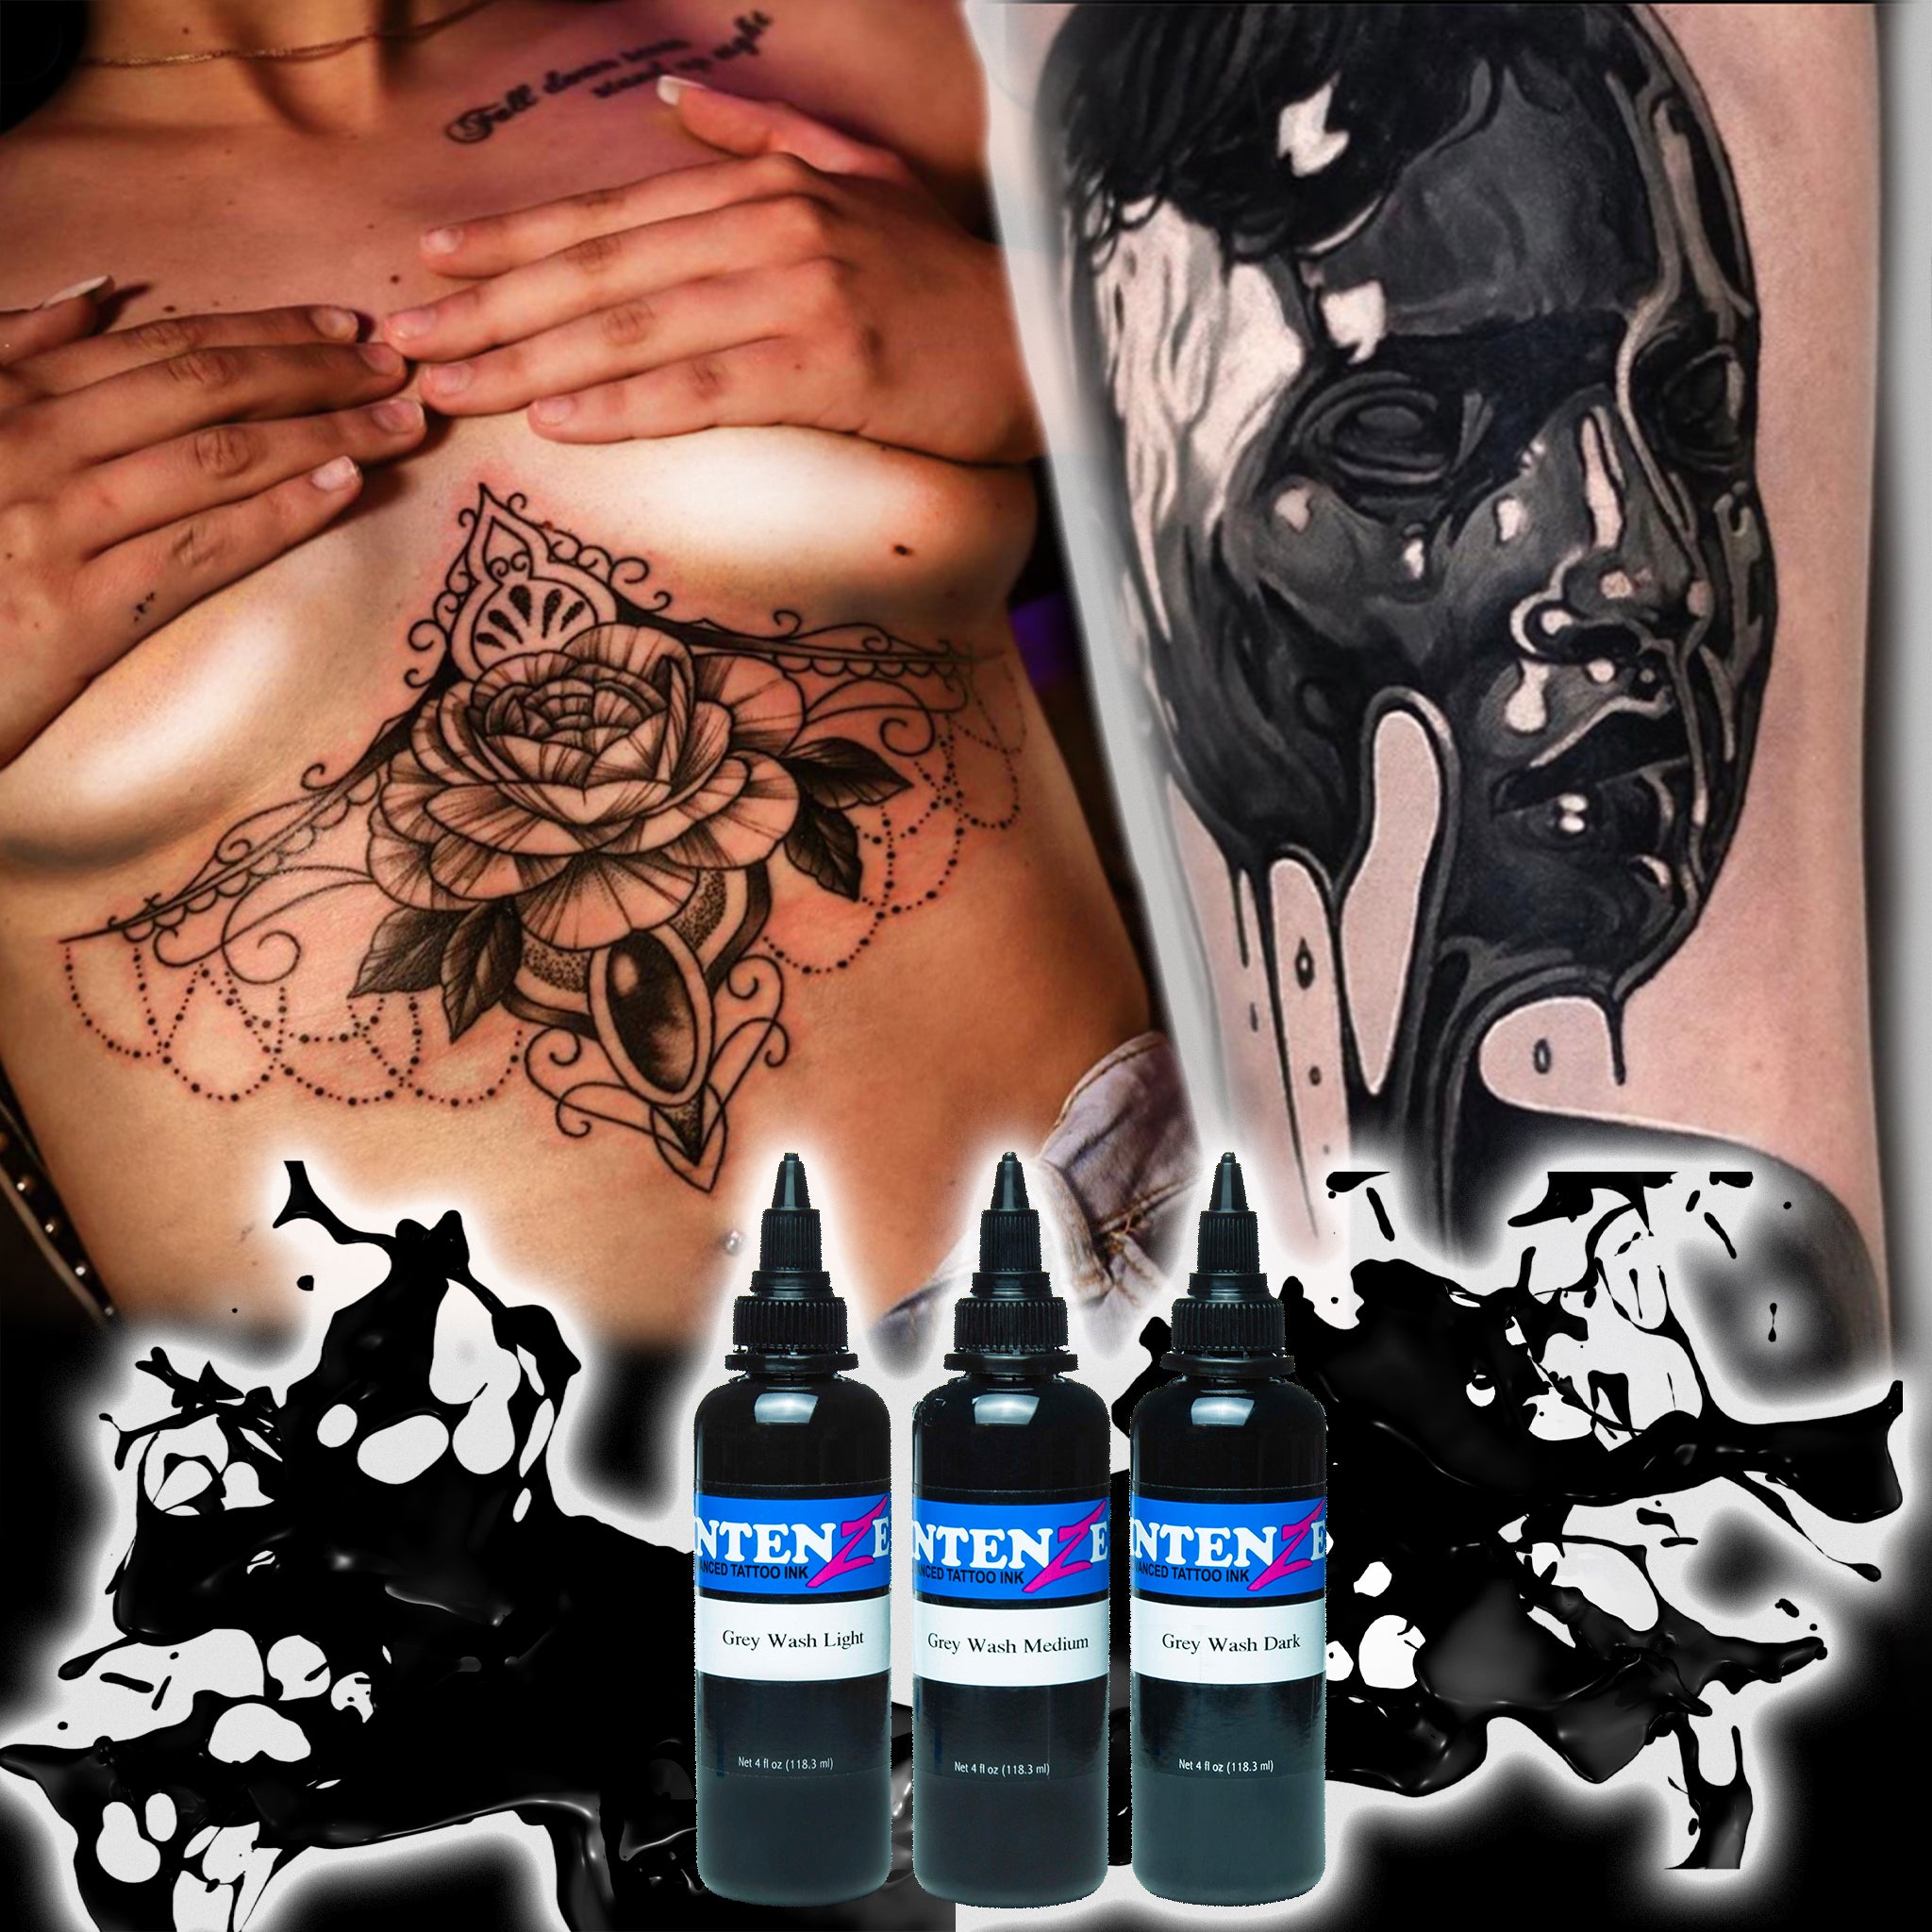 GO Tattoo Removal  Soft grey wash tattoos fade really well as seen